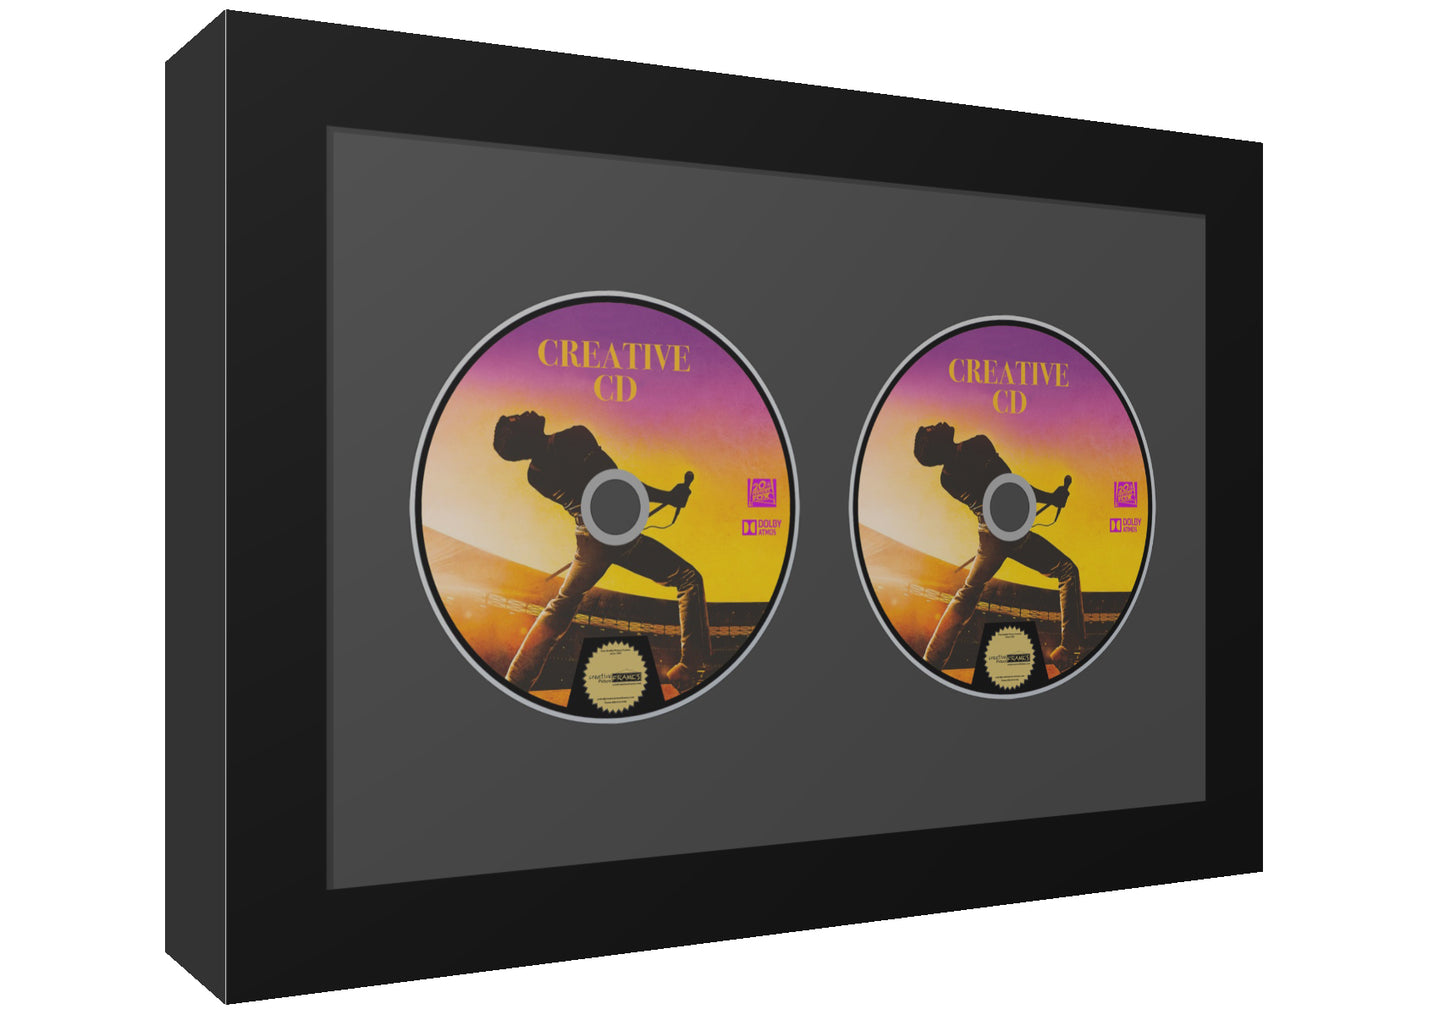 CD Double Disc Frame in our Manhattan Black Molding